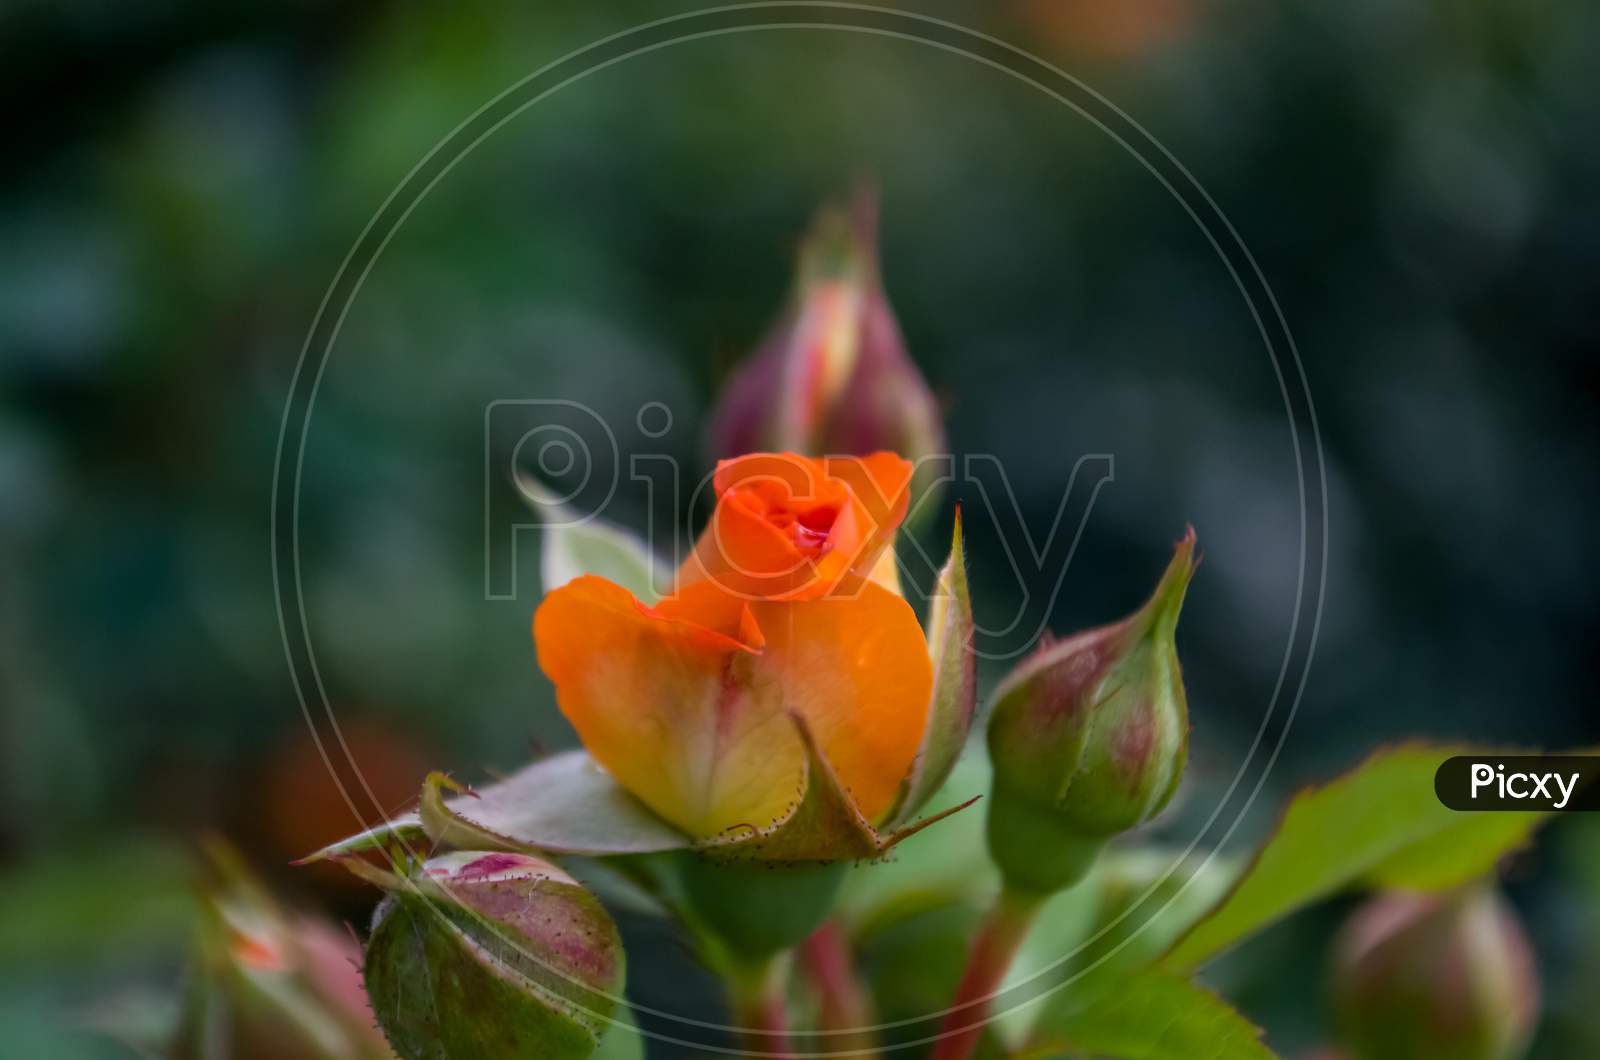 Orange Rose Blooming cover with leafs